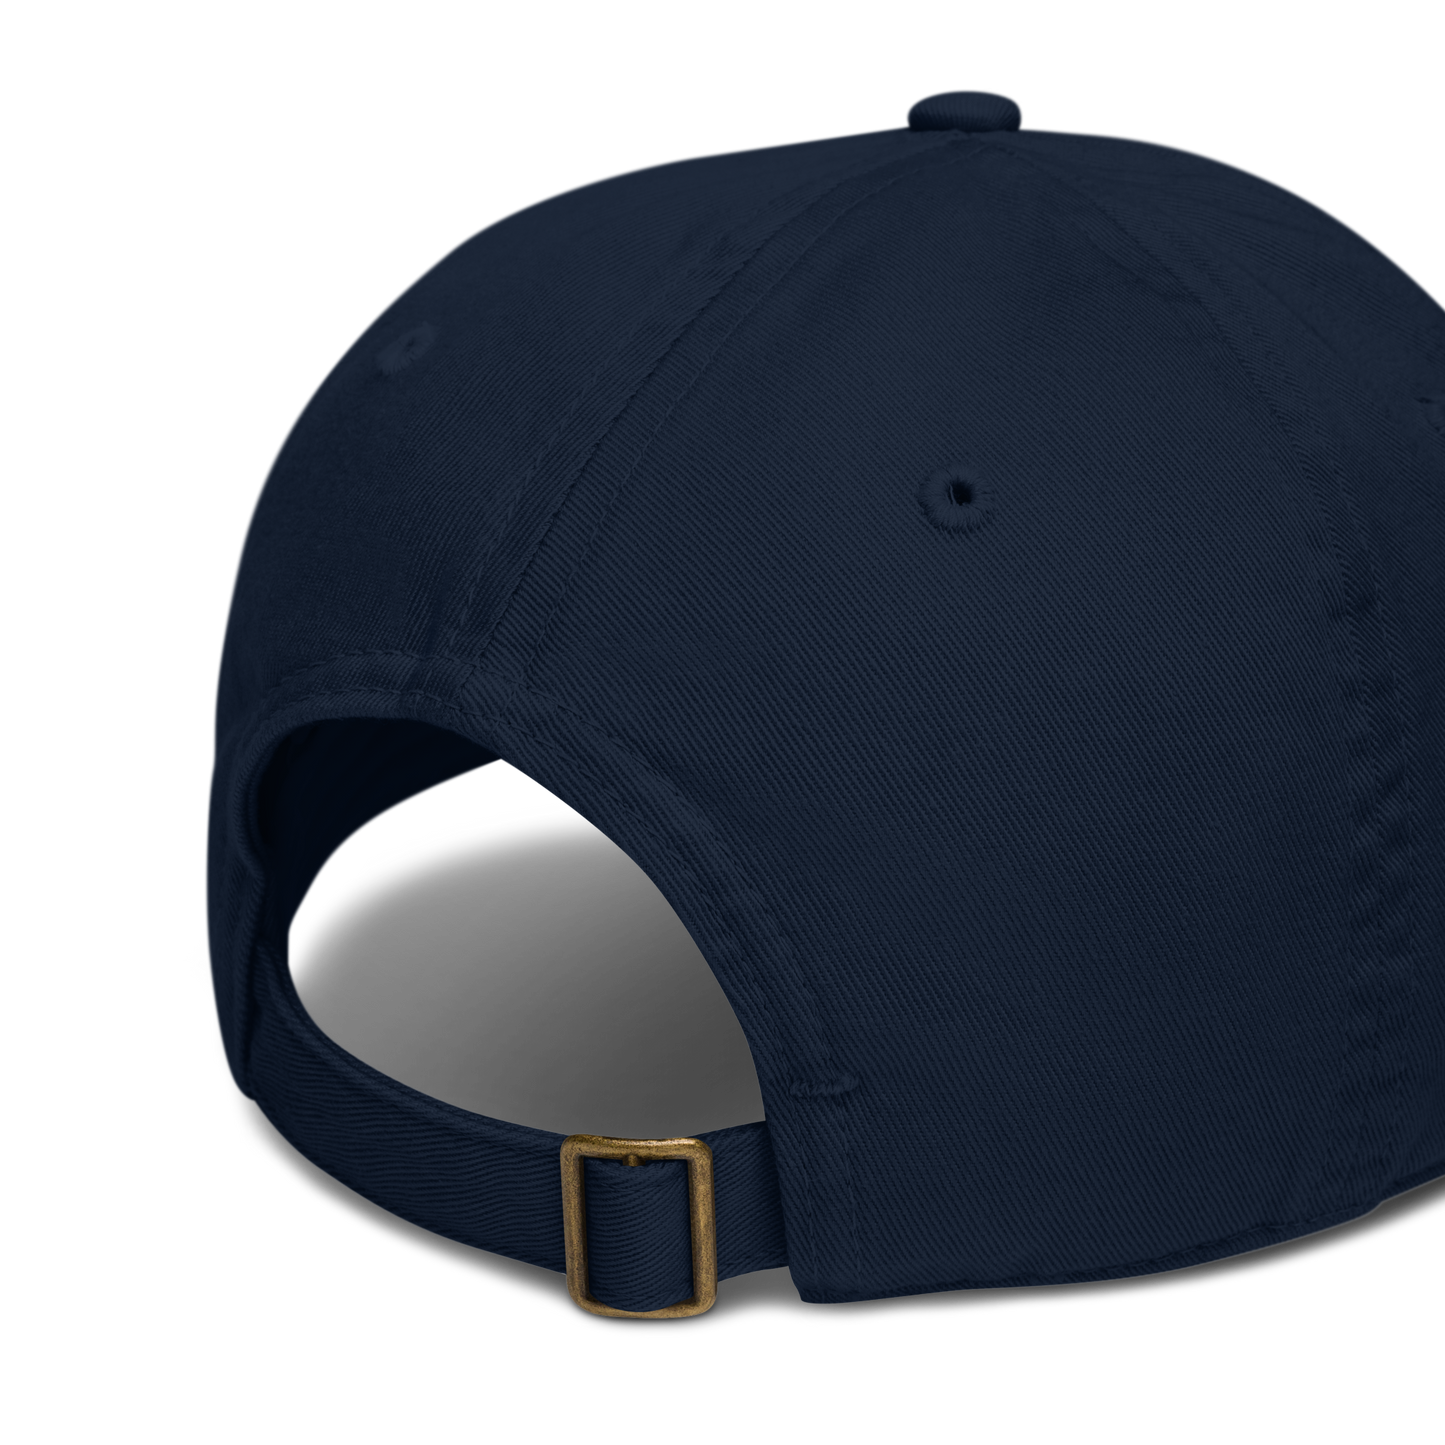 Detroit 'Old English D' Classic Baseball Cap (French Edition)